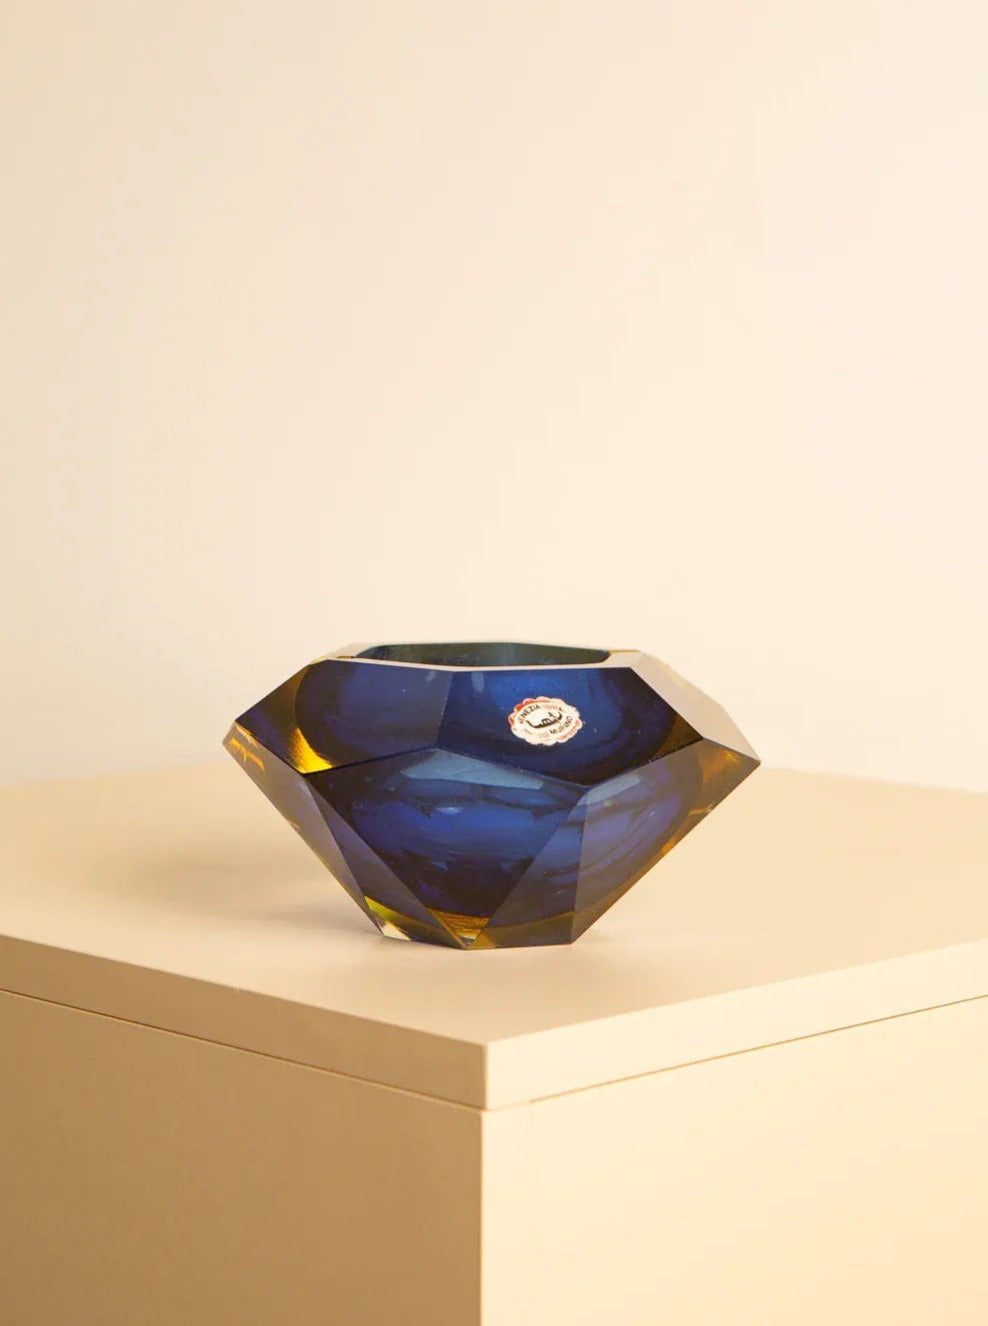 A Large vide-poches blue "Diamond" by Flavio Poli 60's from Treaptyque, faceted and deep blue with slight amber tones around the edges, shaped like a gemstone, sits on a cream-colored pedestal. Handcrafted in the tradition of Italian glass art, it features a small, round, rose gold emblem attached to its side. The background is beige.